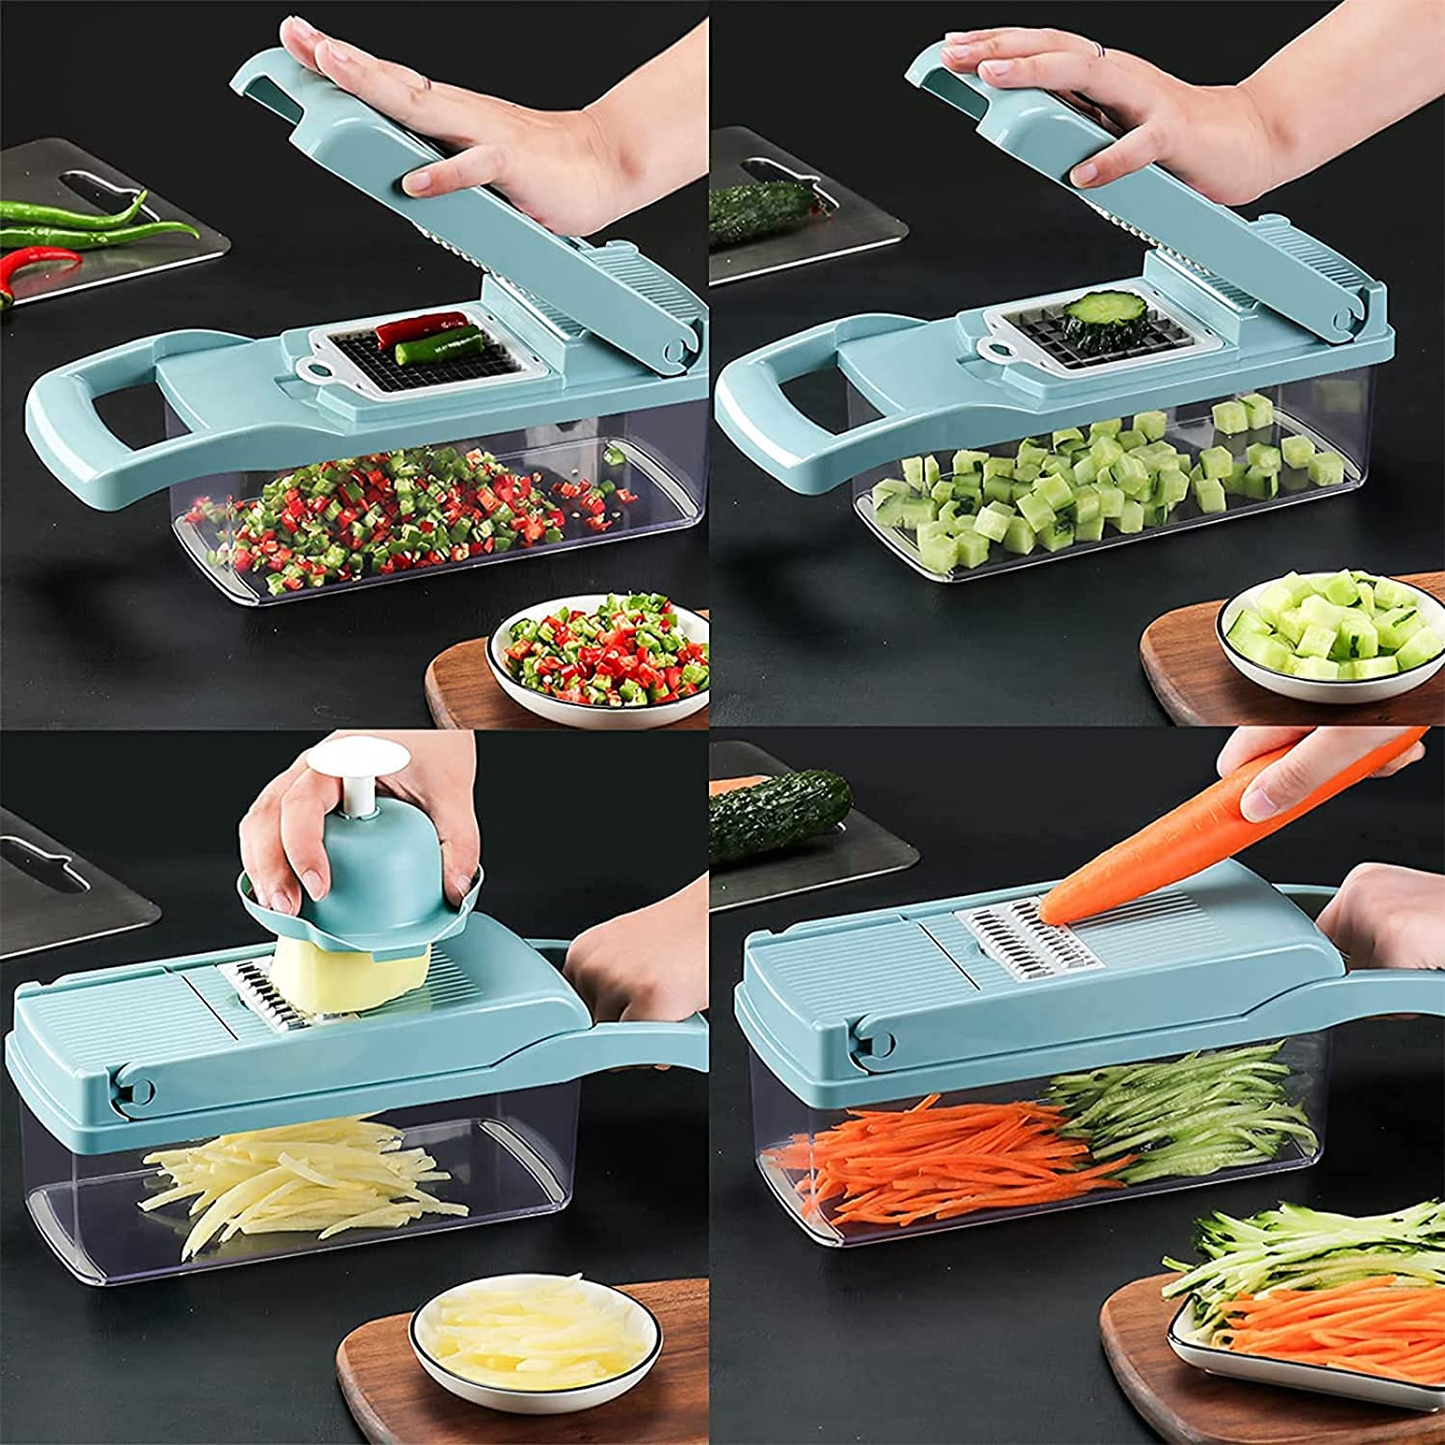 12-in-1 Multifunctional Mandoline Vegetable Chopper Slicer, Vegetable Chopper, Pro Food Chopper Vegetable Cutter and Dicers, Onion Chopper with Container, Vegetable Slicer and Chopper for - 7 Blades